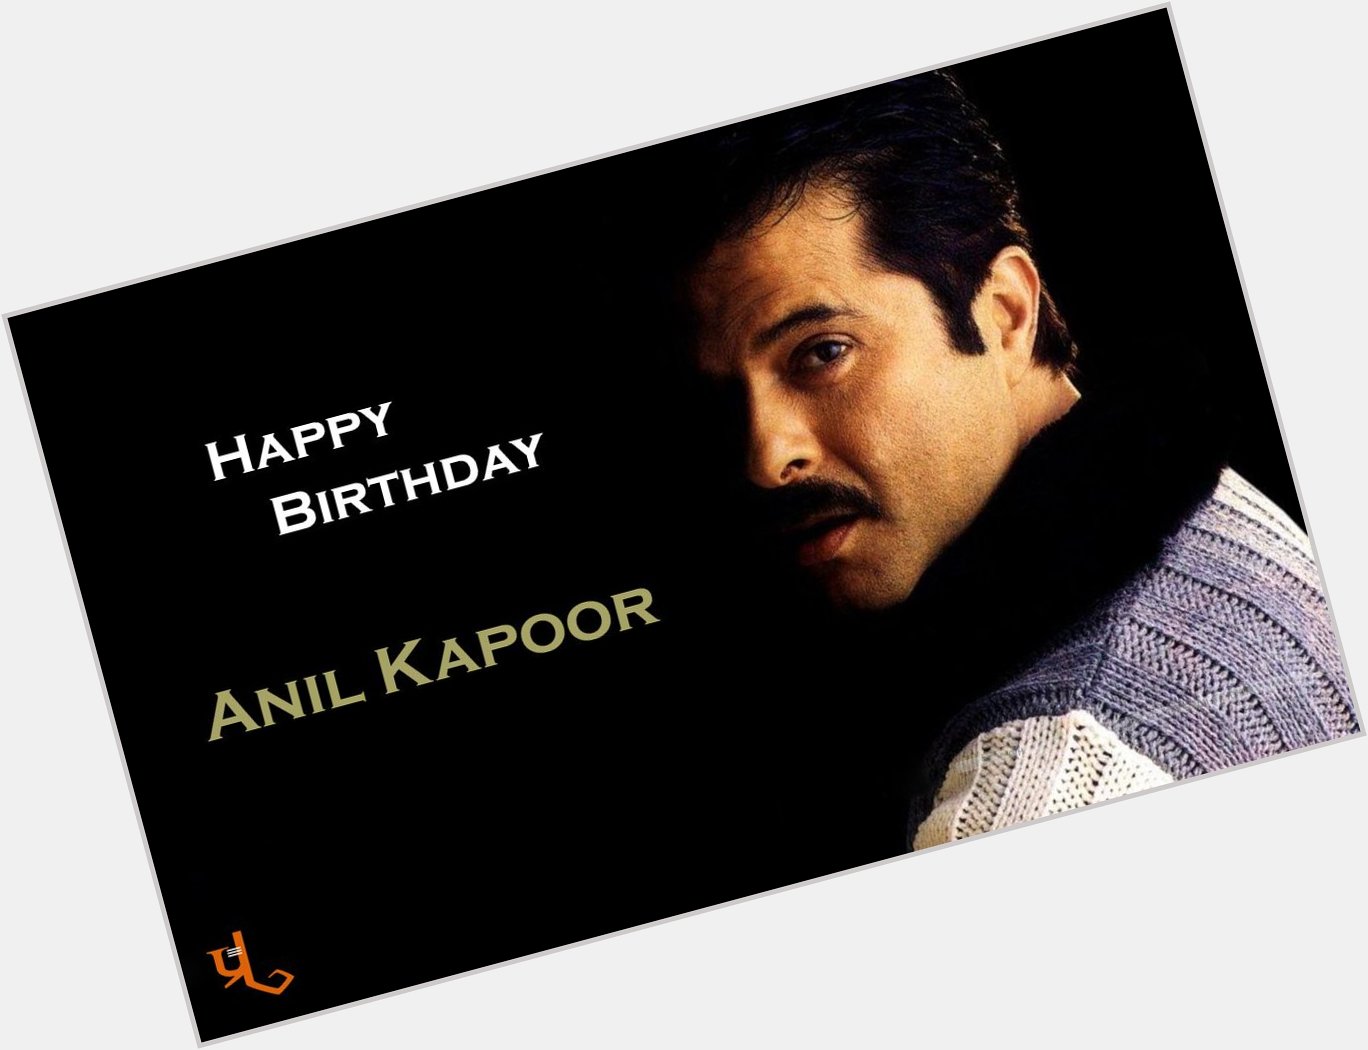 We wish happy birthday to eternally young and a \rockstar\ of bollywood Anil Kapoor 